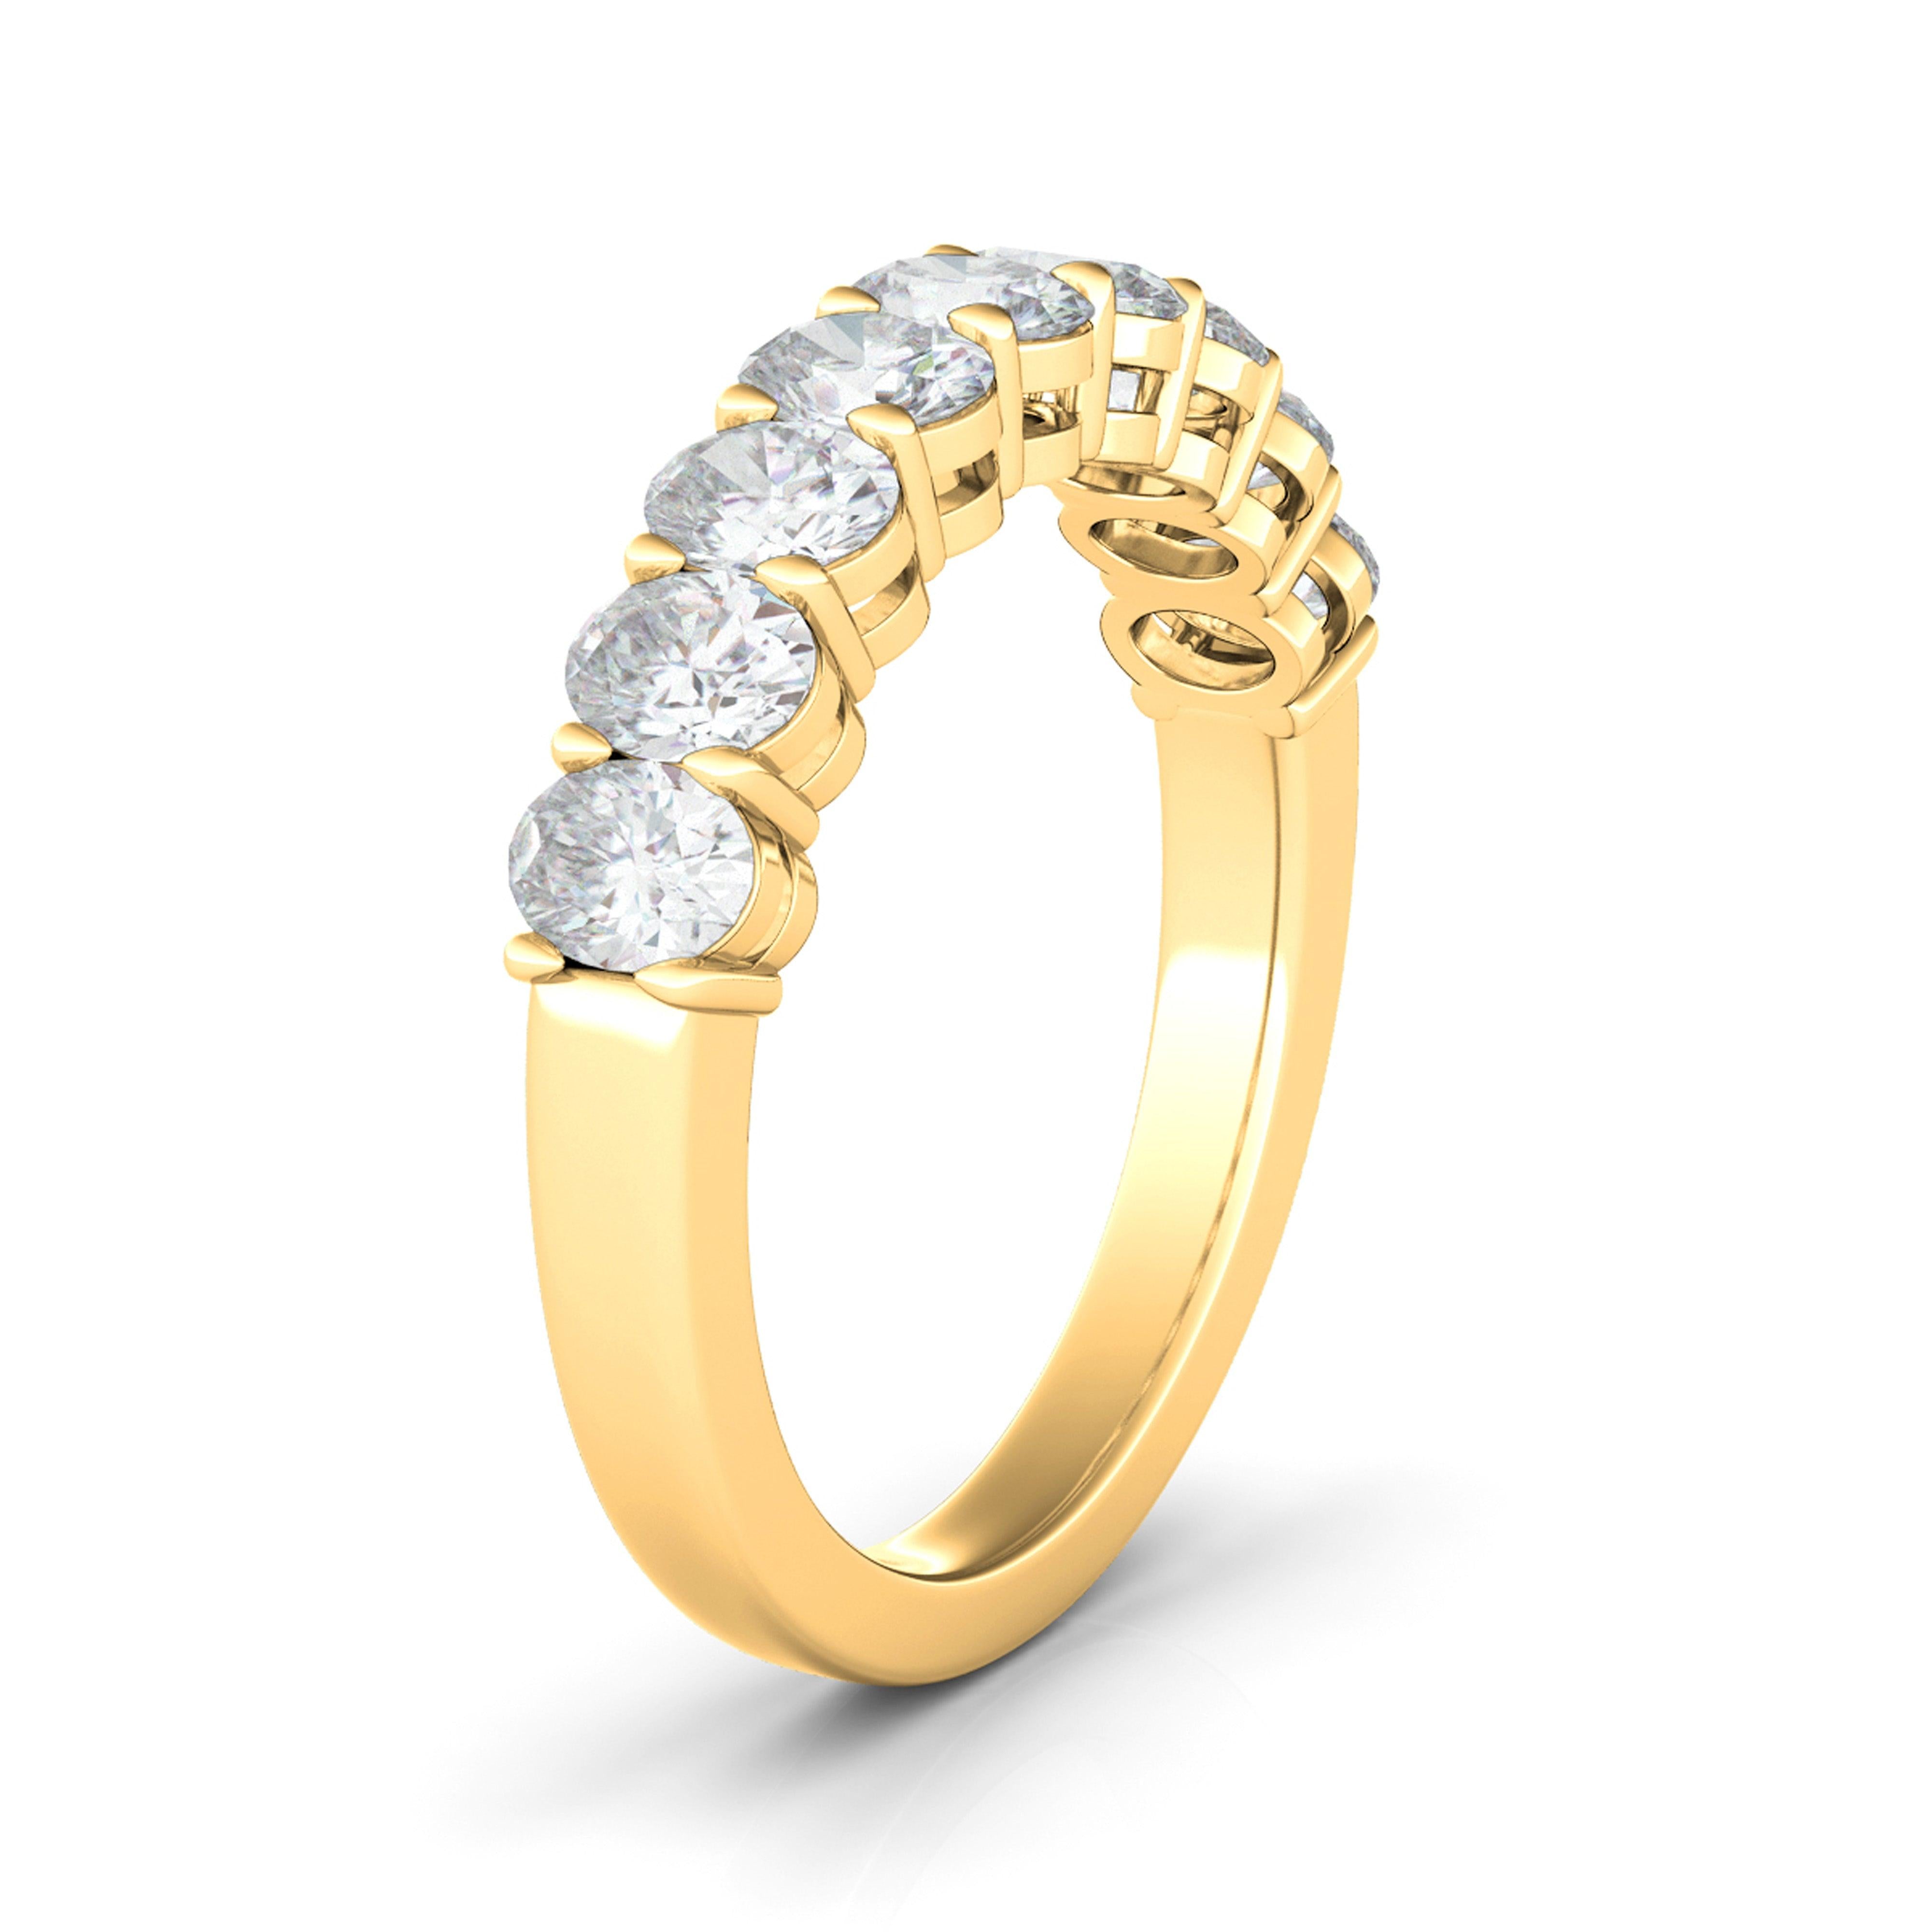 Buy Stunning Yellow Gold and Diamond Ring Online | ORRA